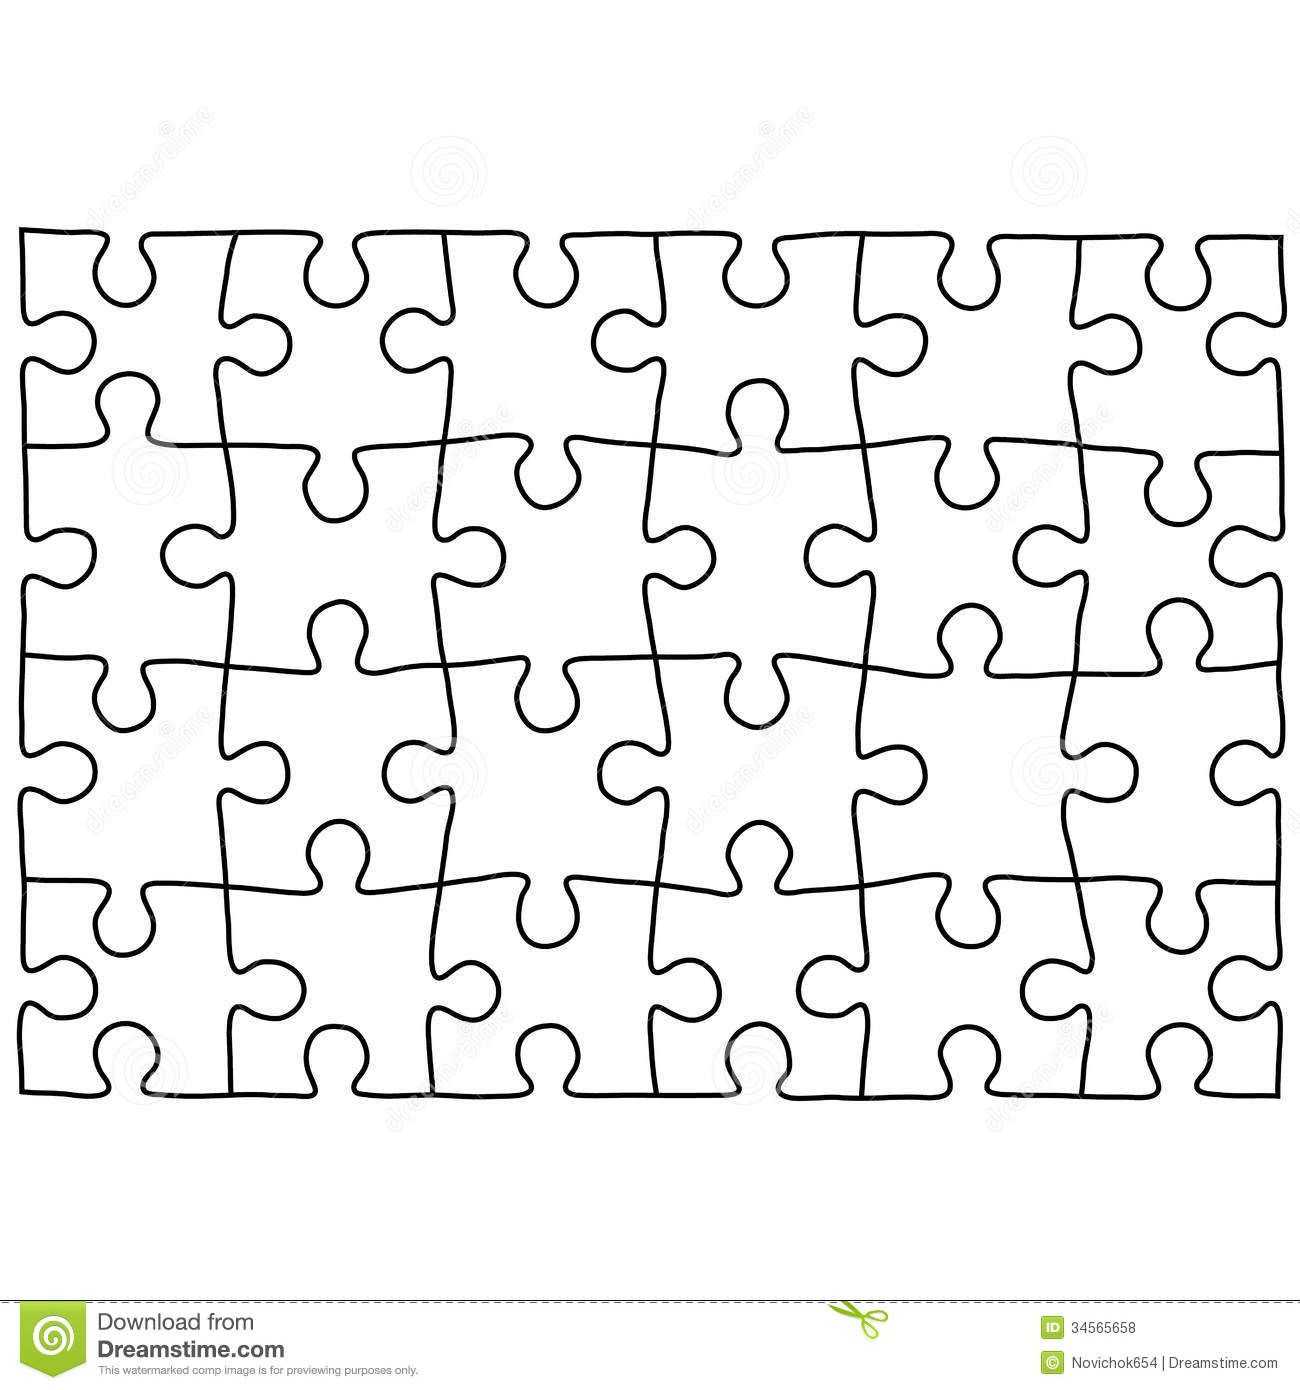 Jigsaw Puzzle Design Template | Free Puzzle Templates Intended For Jigsaw Puzzle Template For Word